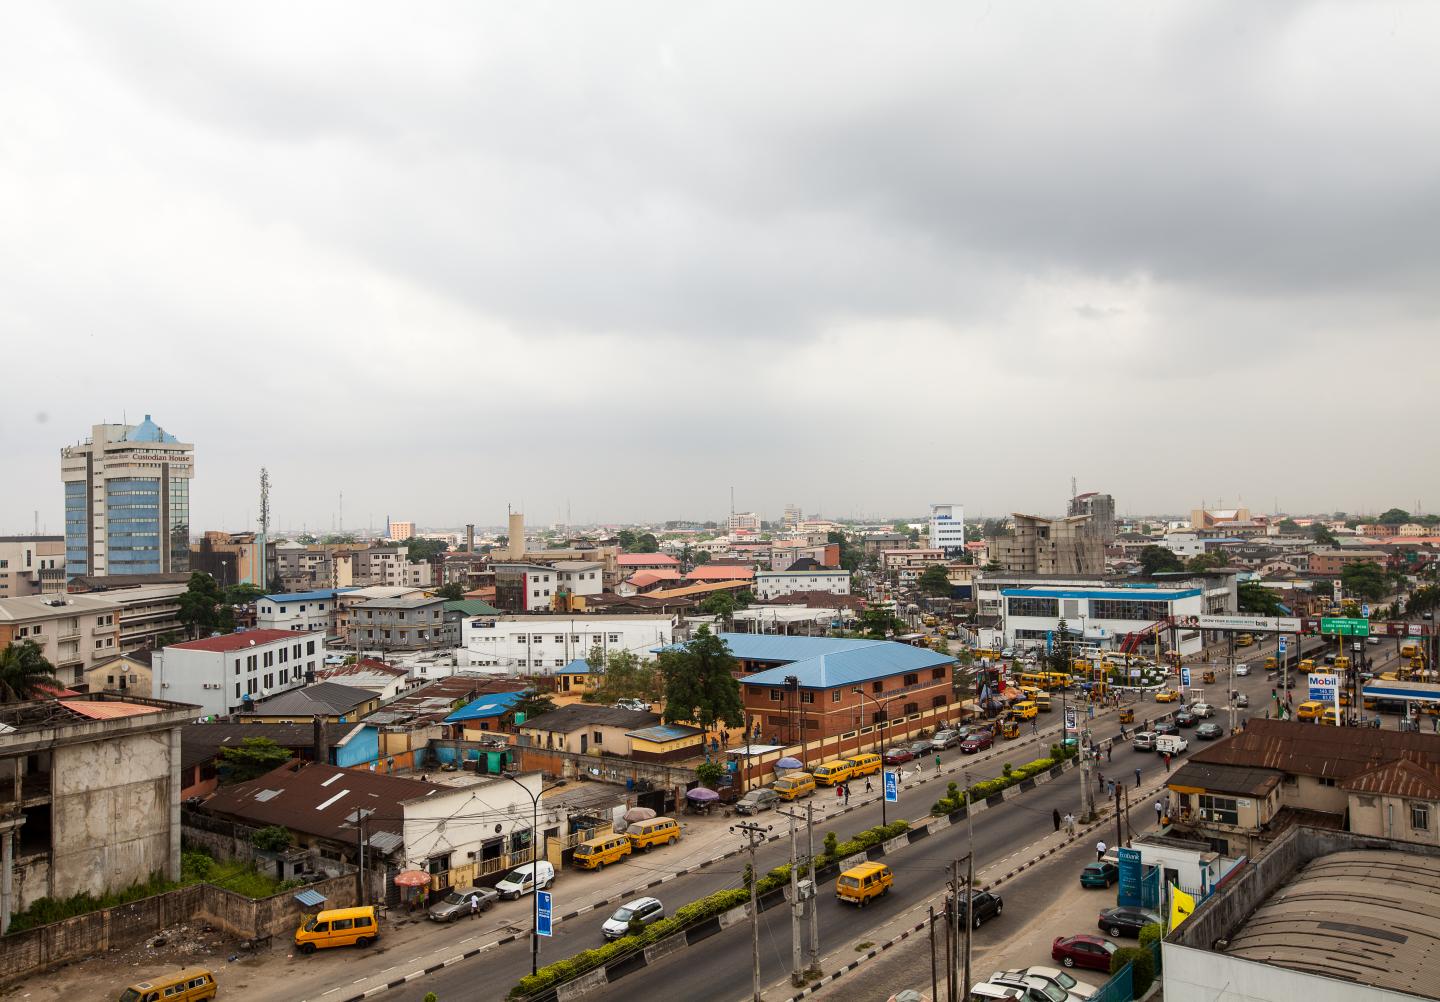 The Yaba district of Lagos, Nigeria's biggest city, has served as a hub for the West African country's budding tech and startup scene. Photo: ADEOLA OLAGUNJU